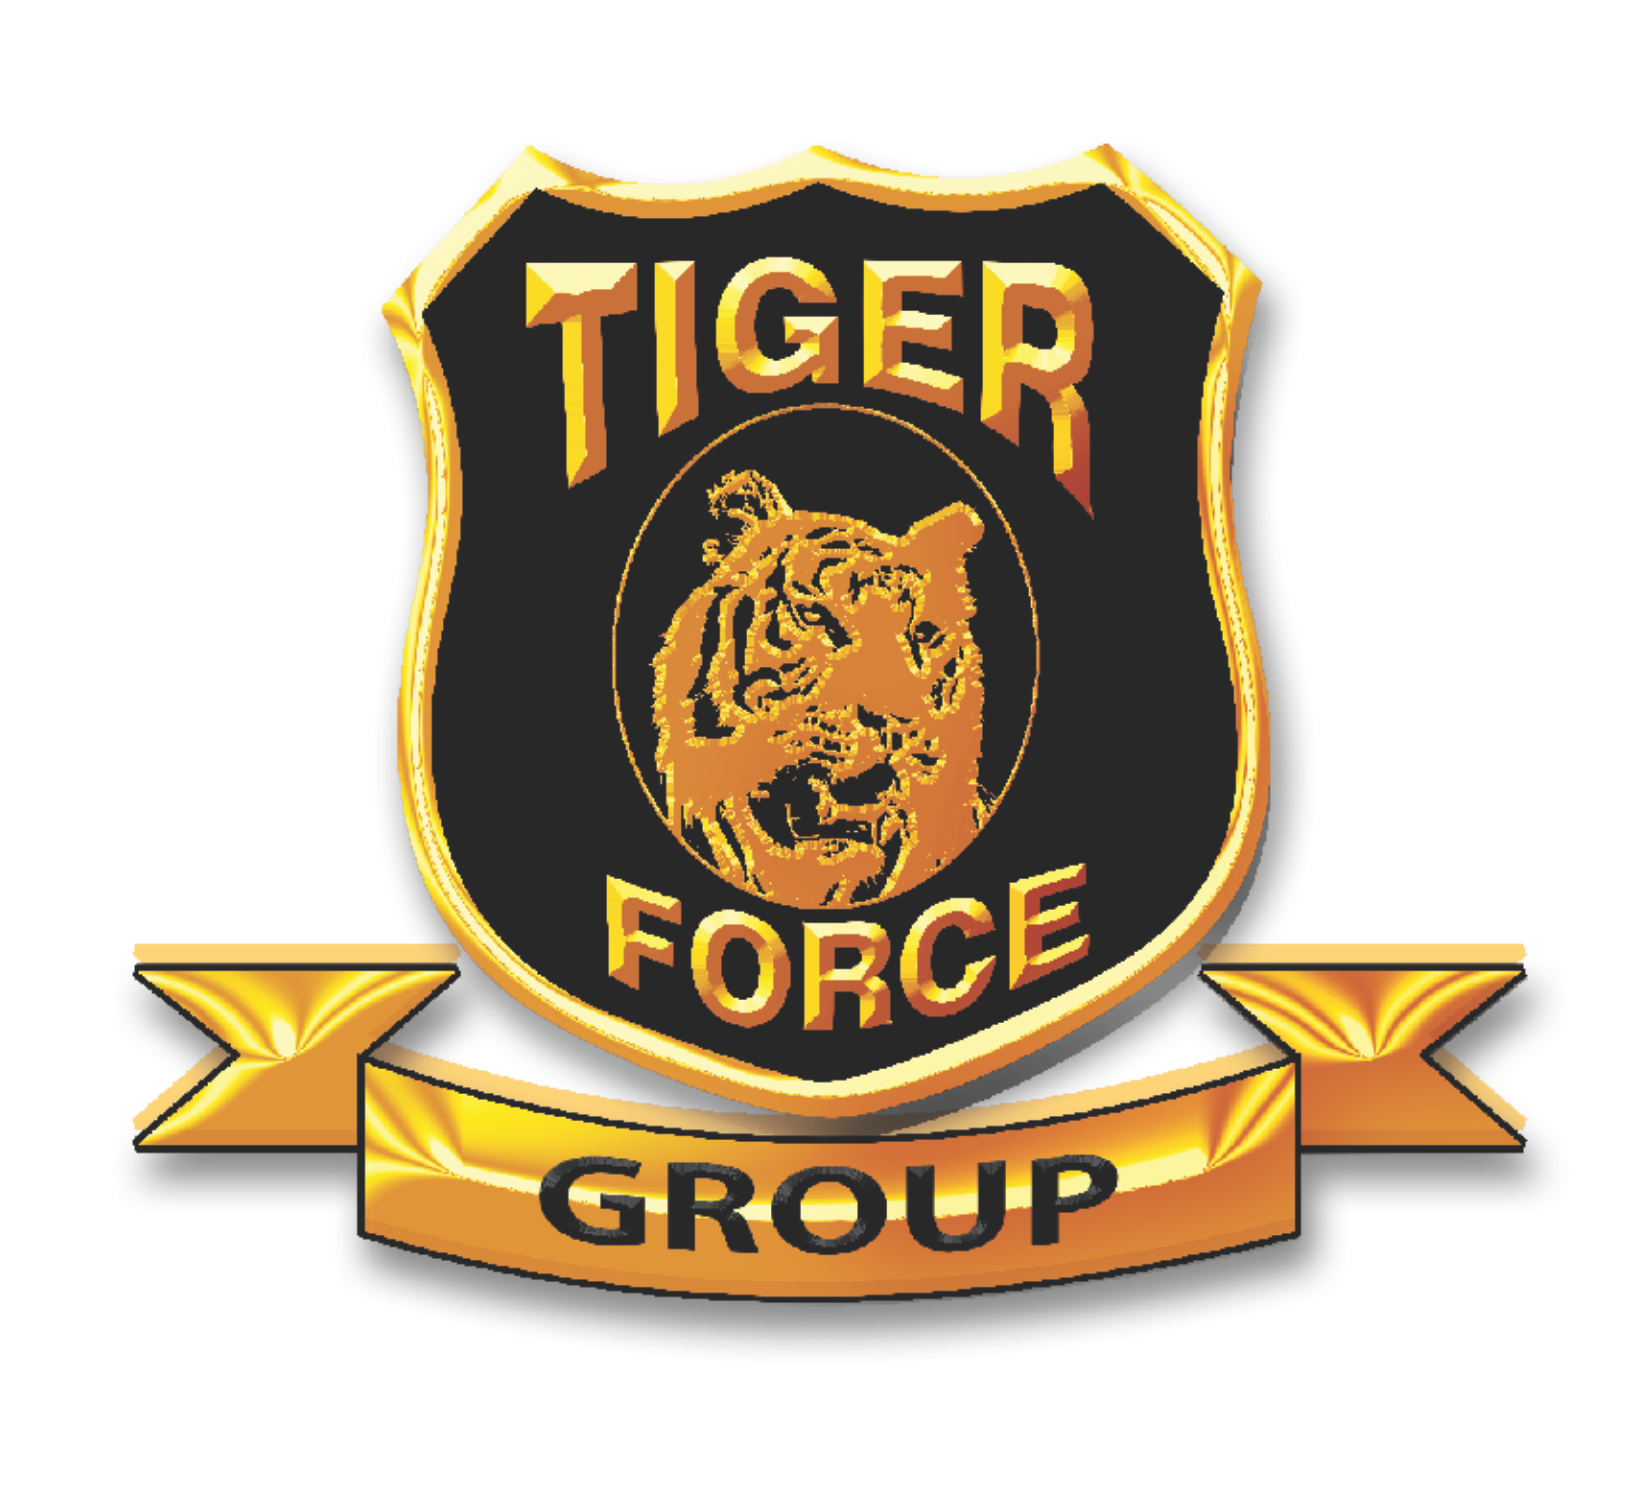 TIGER FORCE GROUP